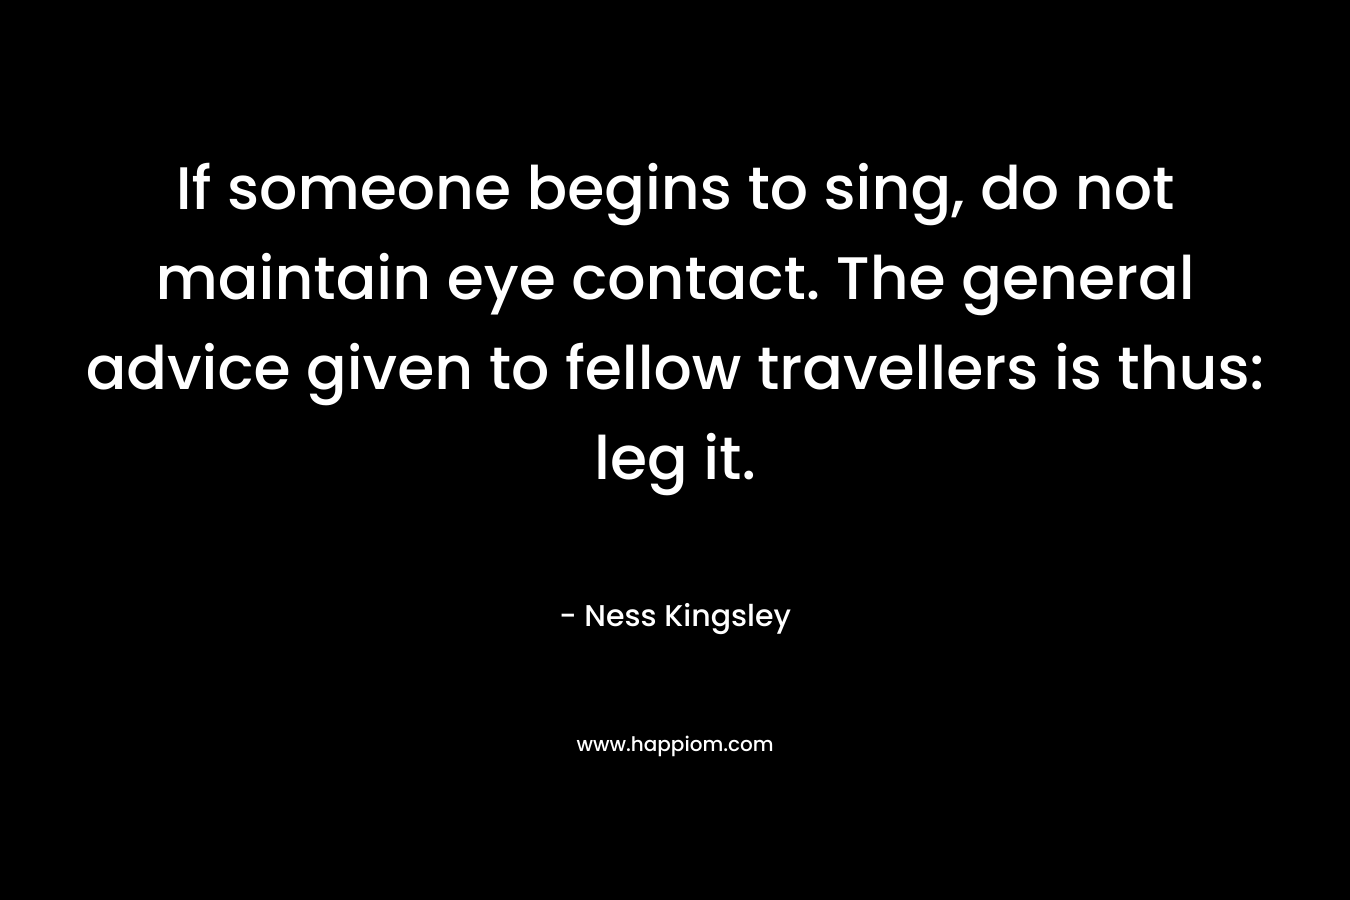 If someone begins to sing, do not maintain eye contact. The general advice given to fellow travellers is thus: leg it. – Ness Kingsley